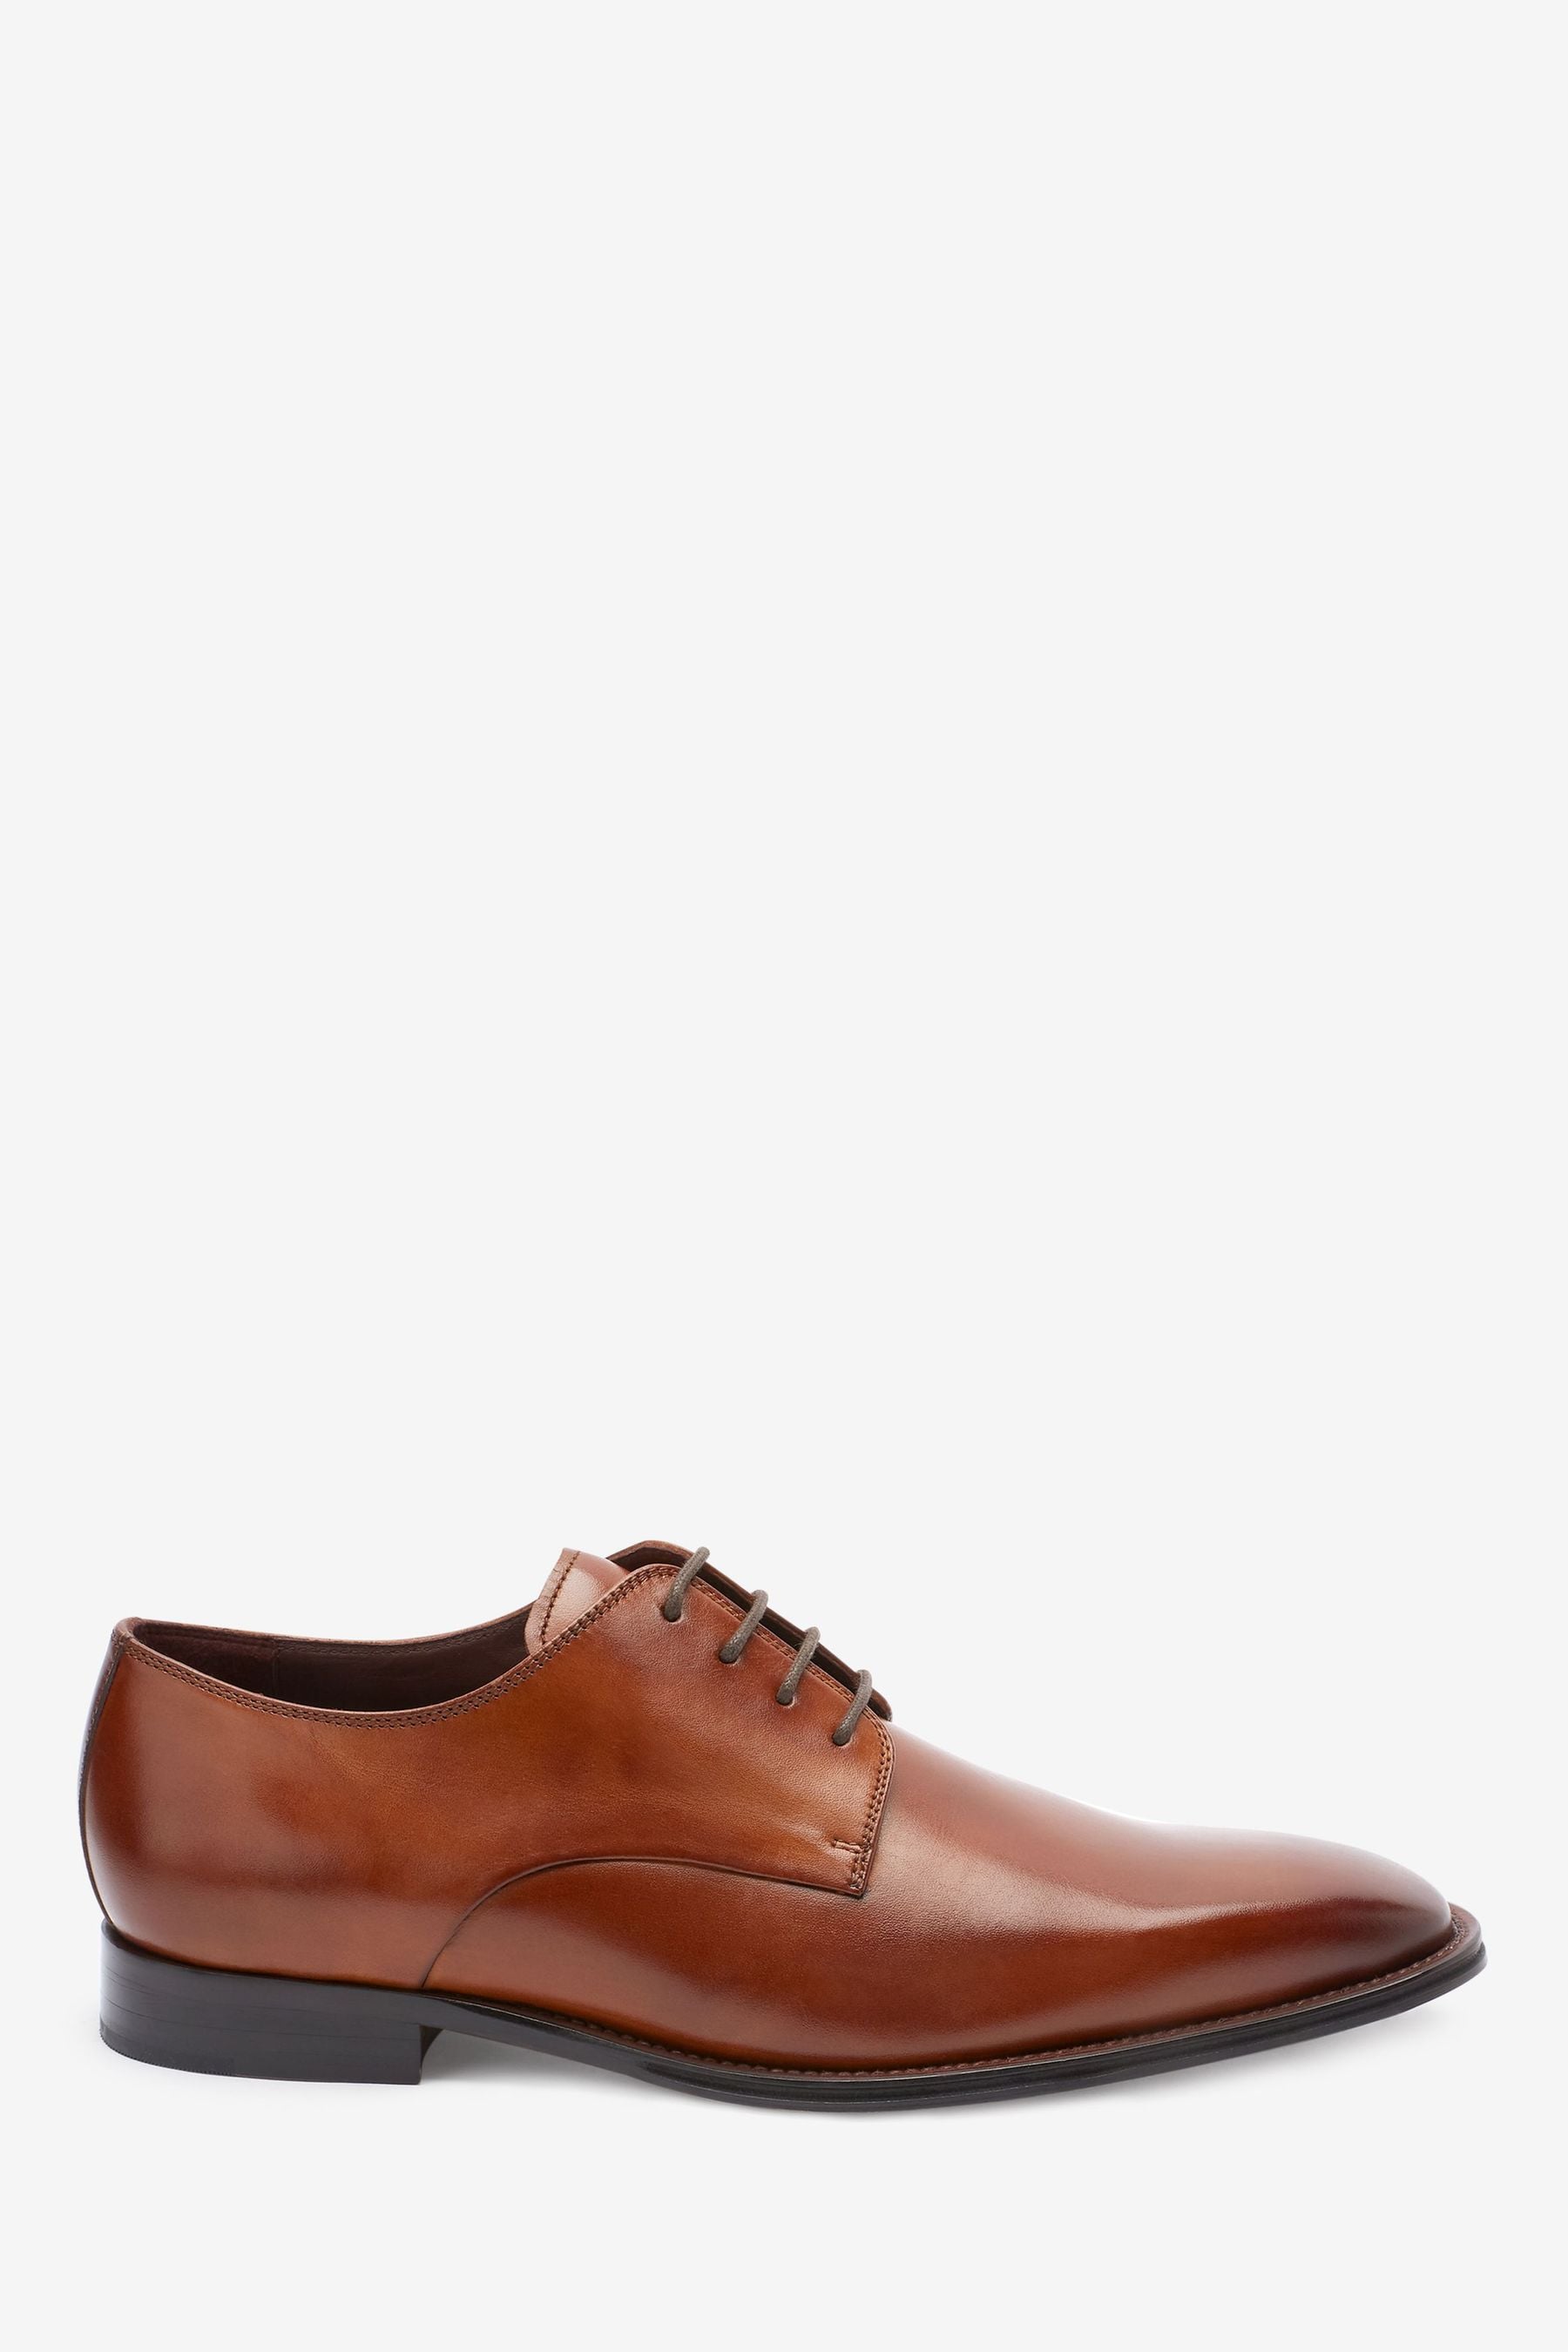 Buy Signature Italian Leather Square Toe Derby Shoes from Next Ireland